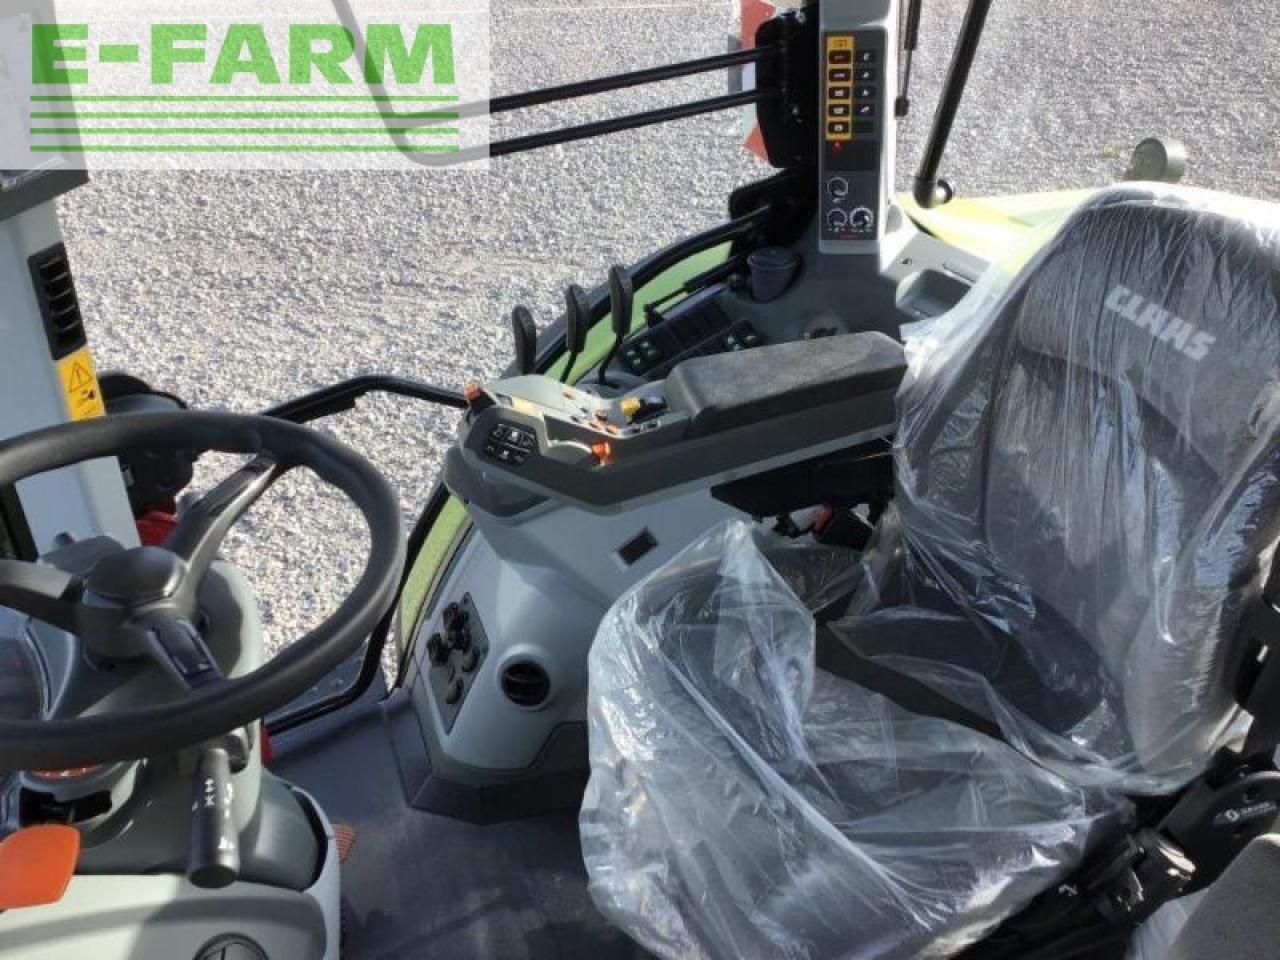 Farm tractor CLAAS arion 530 stage v